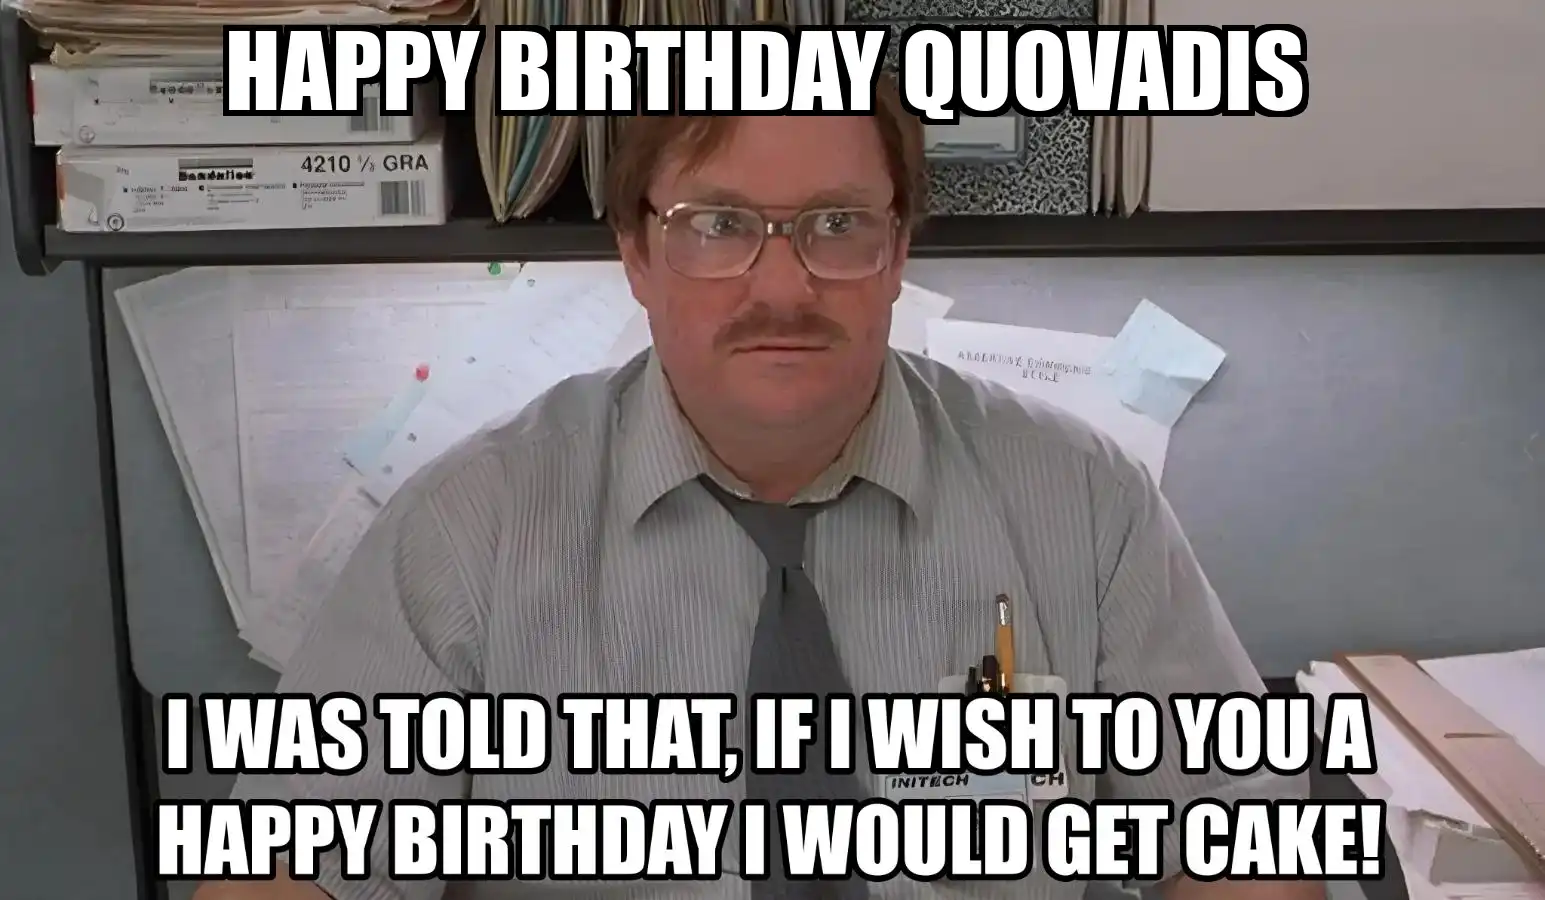 Happy Birthday Quovadis I Would Get A Cake Meme